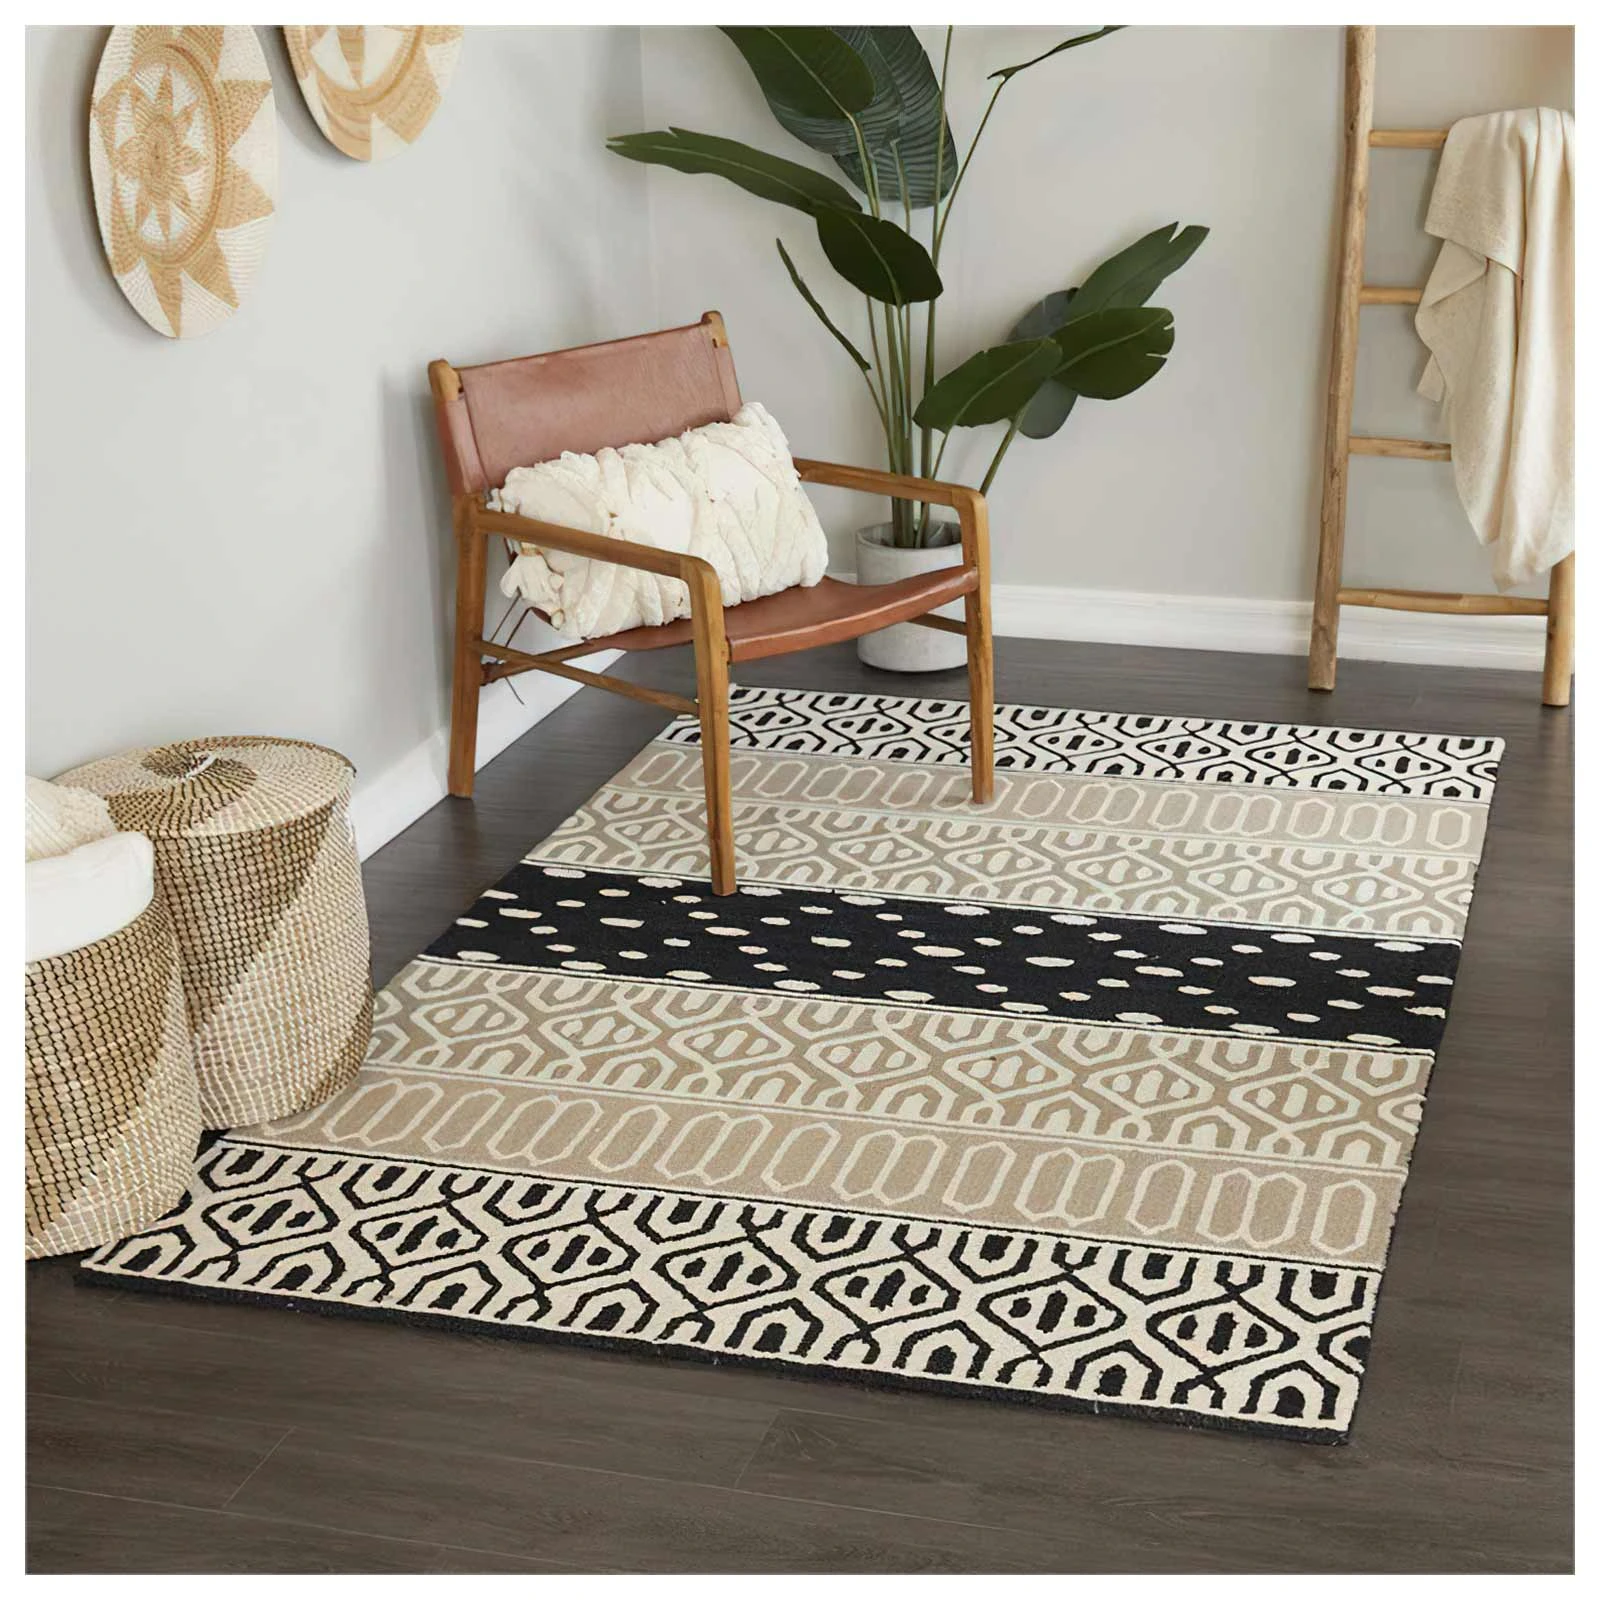 The UMA Enterprise area rug shown with a matching chair and décor 